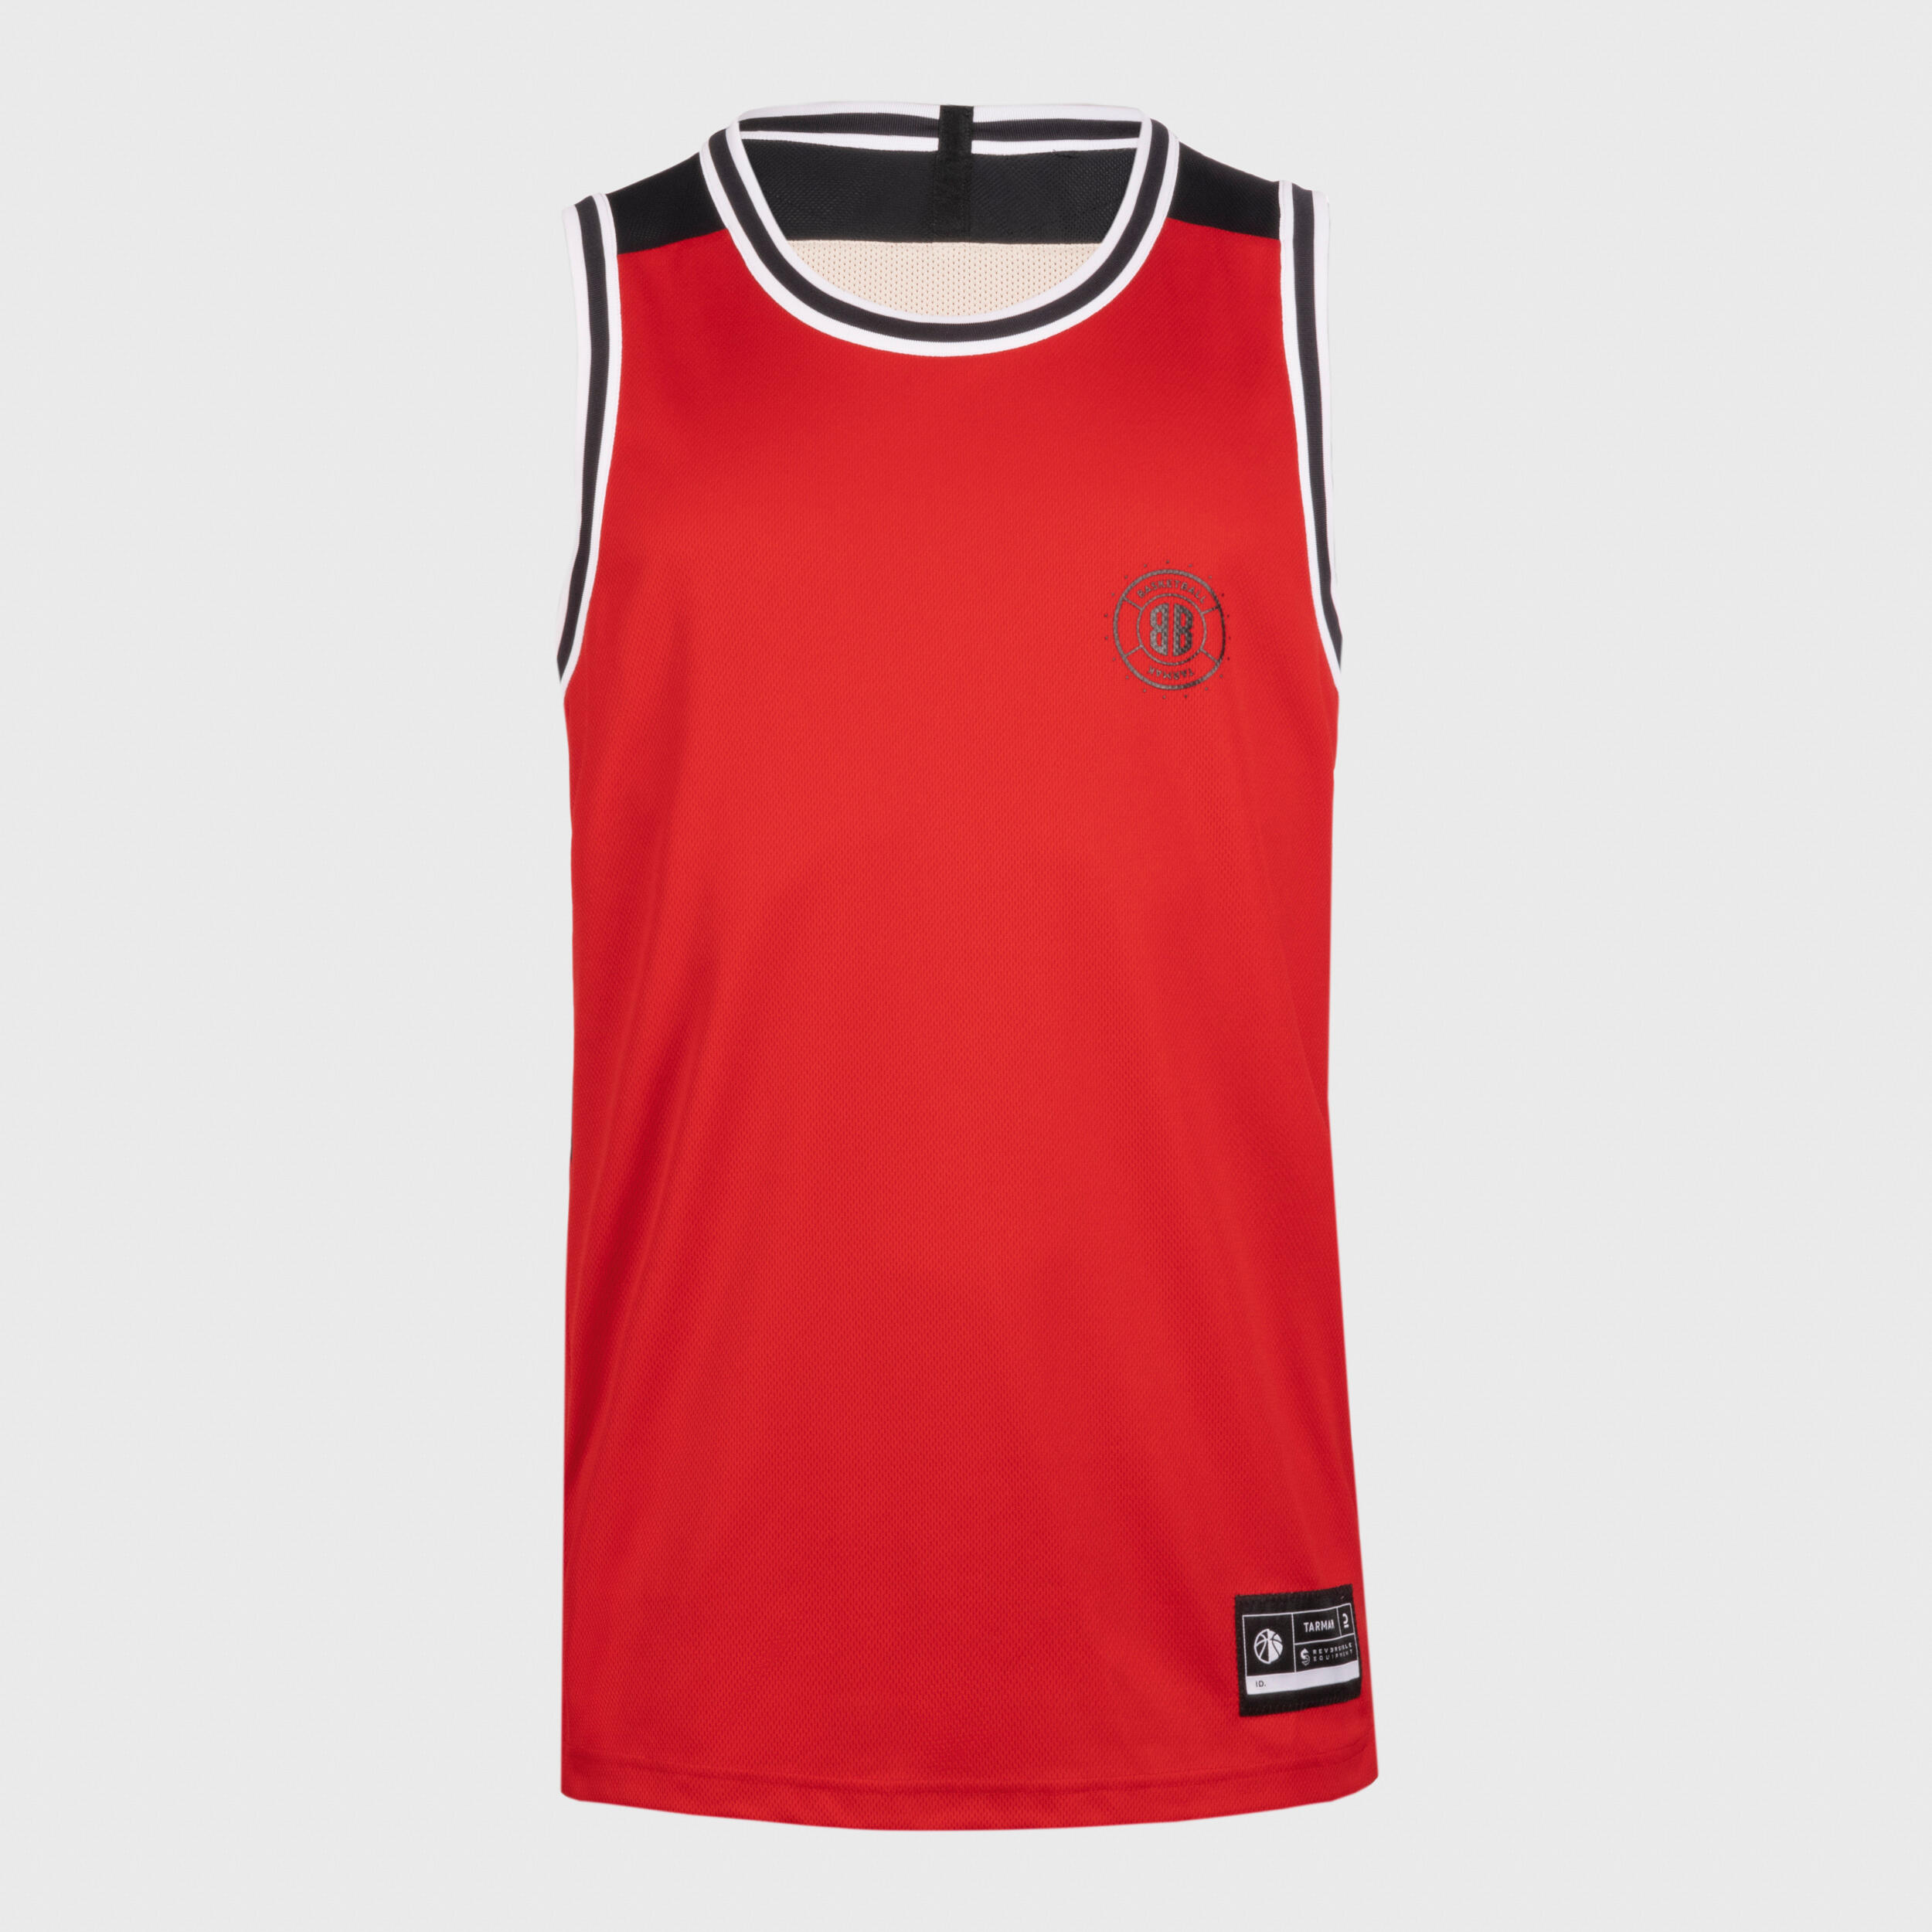 Adult 2-Way Sleeveless Basketball Jersey T500 - Red/Beige 6/9